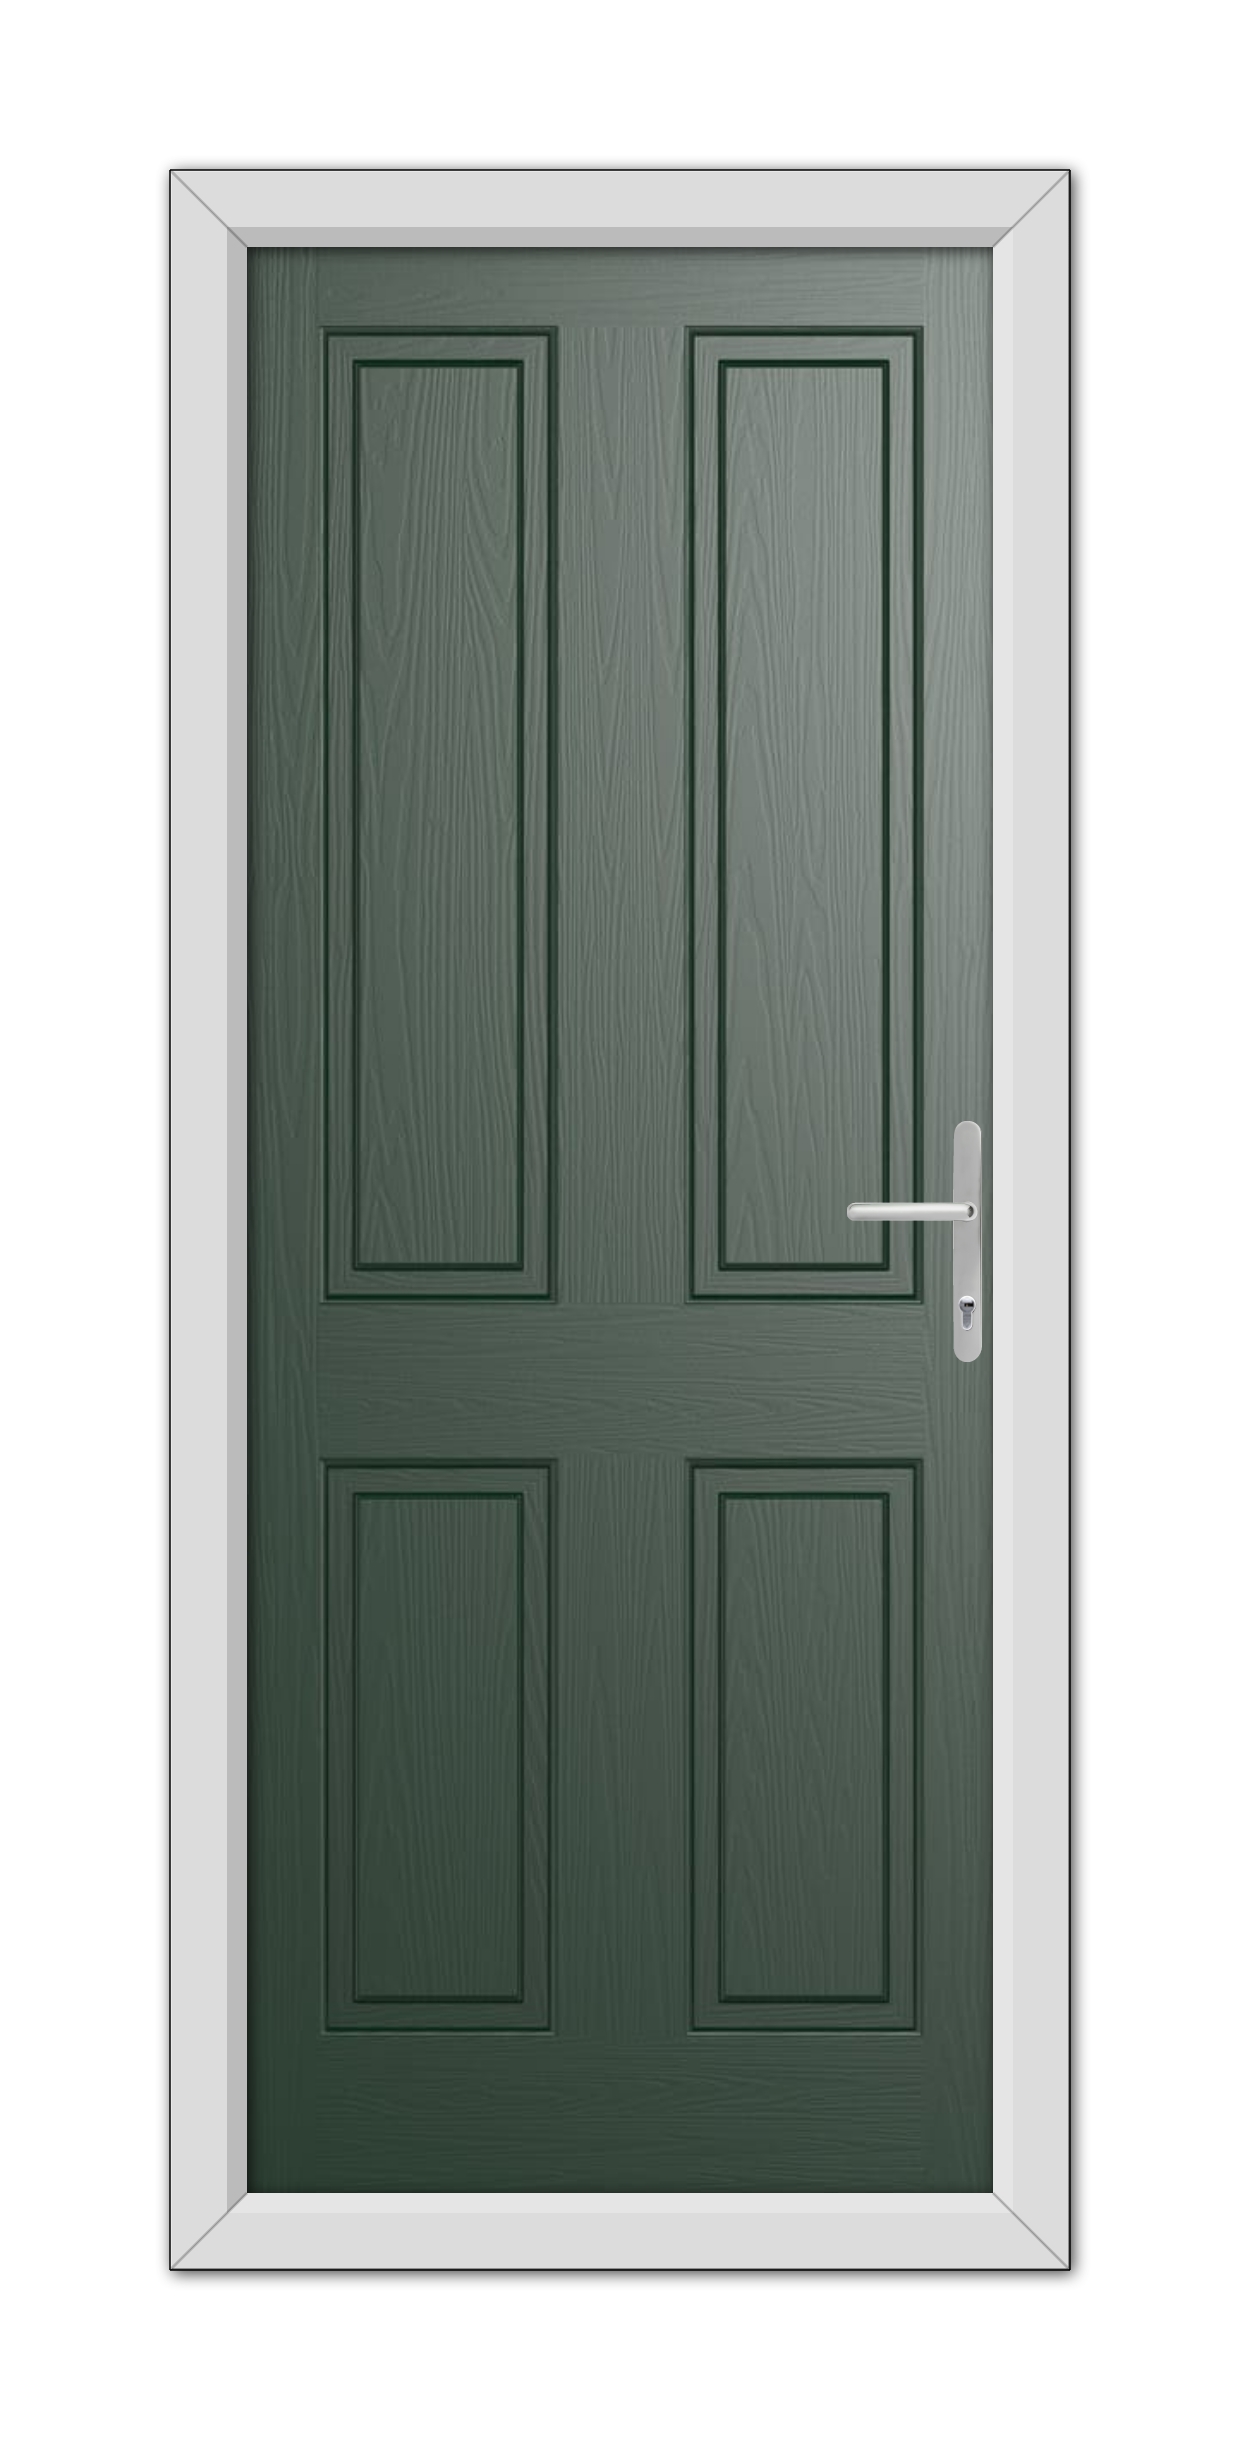 A Green Whitmore Solid Composite Door 48mm Timber Core with a white frame and a modern handle, isolated on a white background.